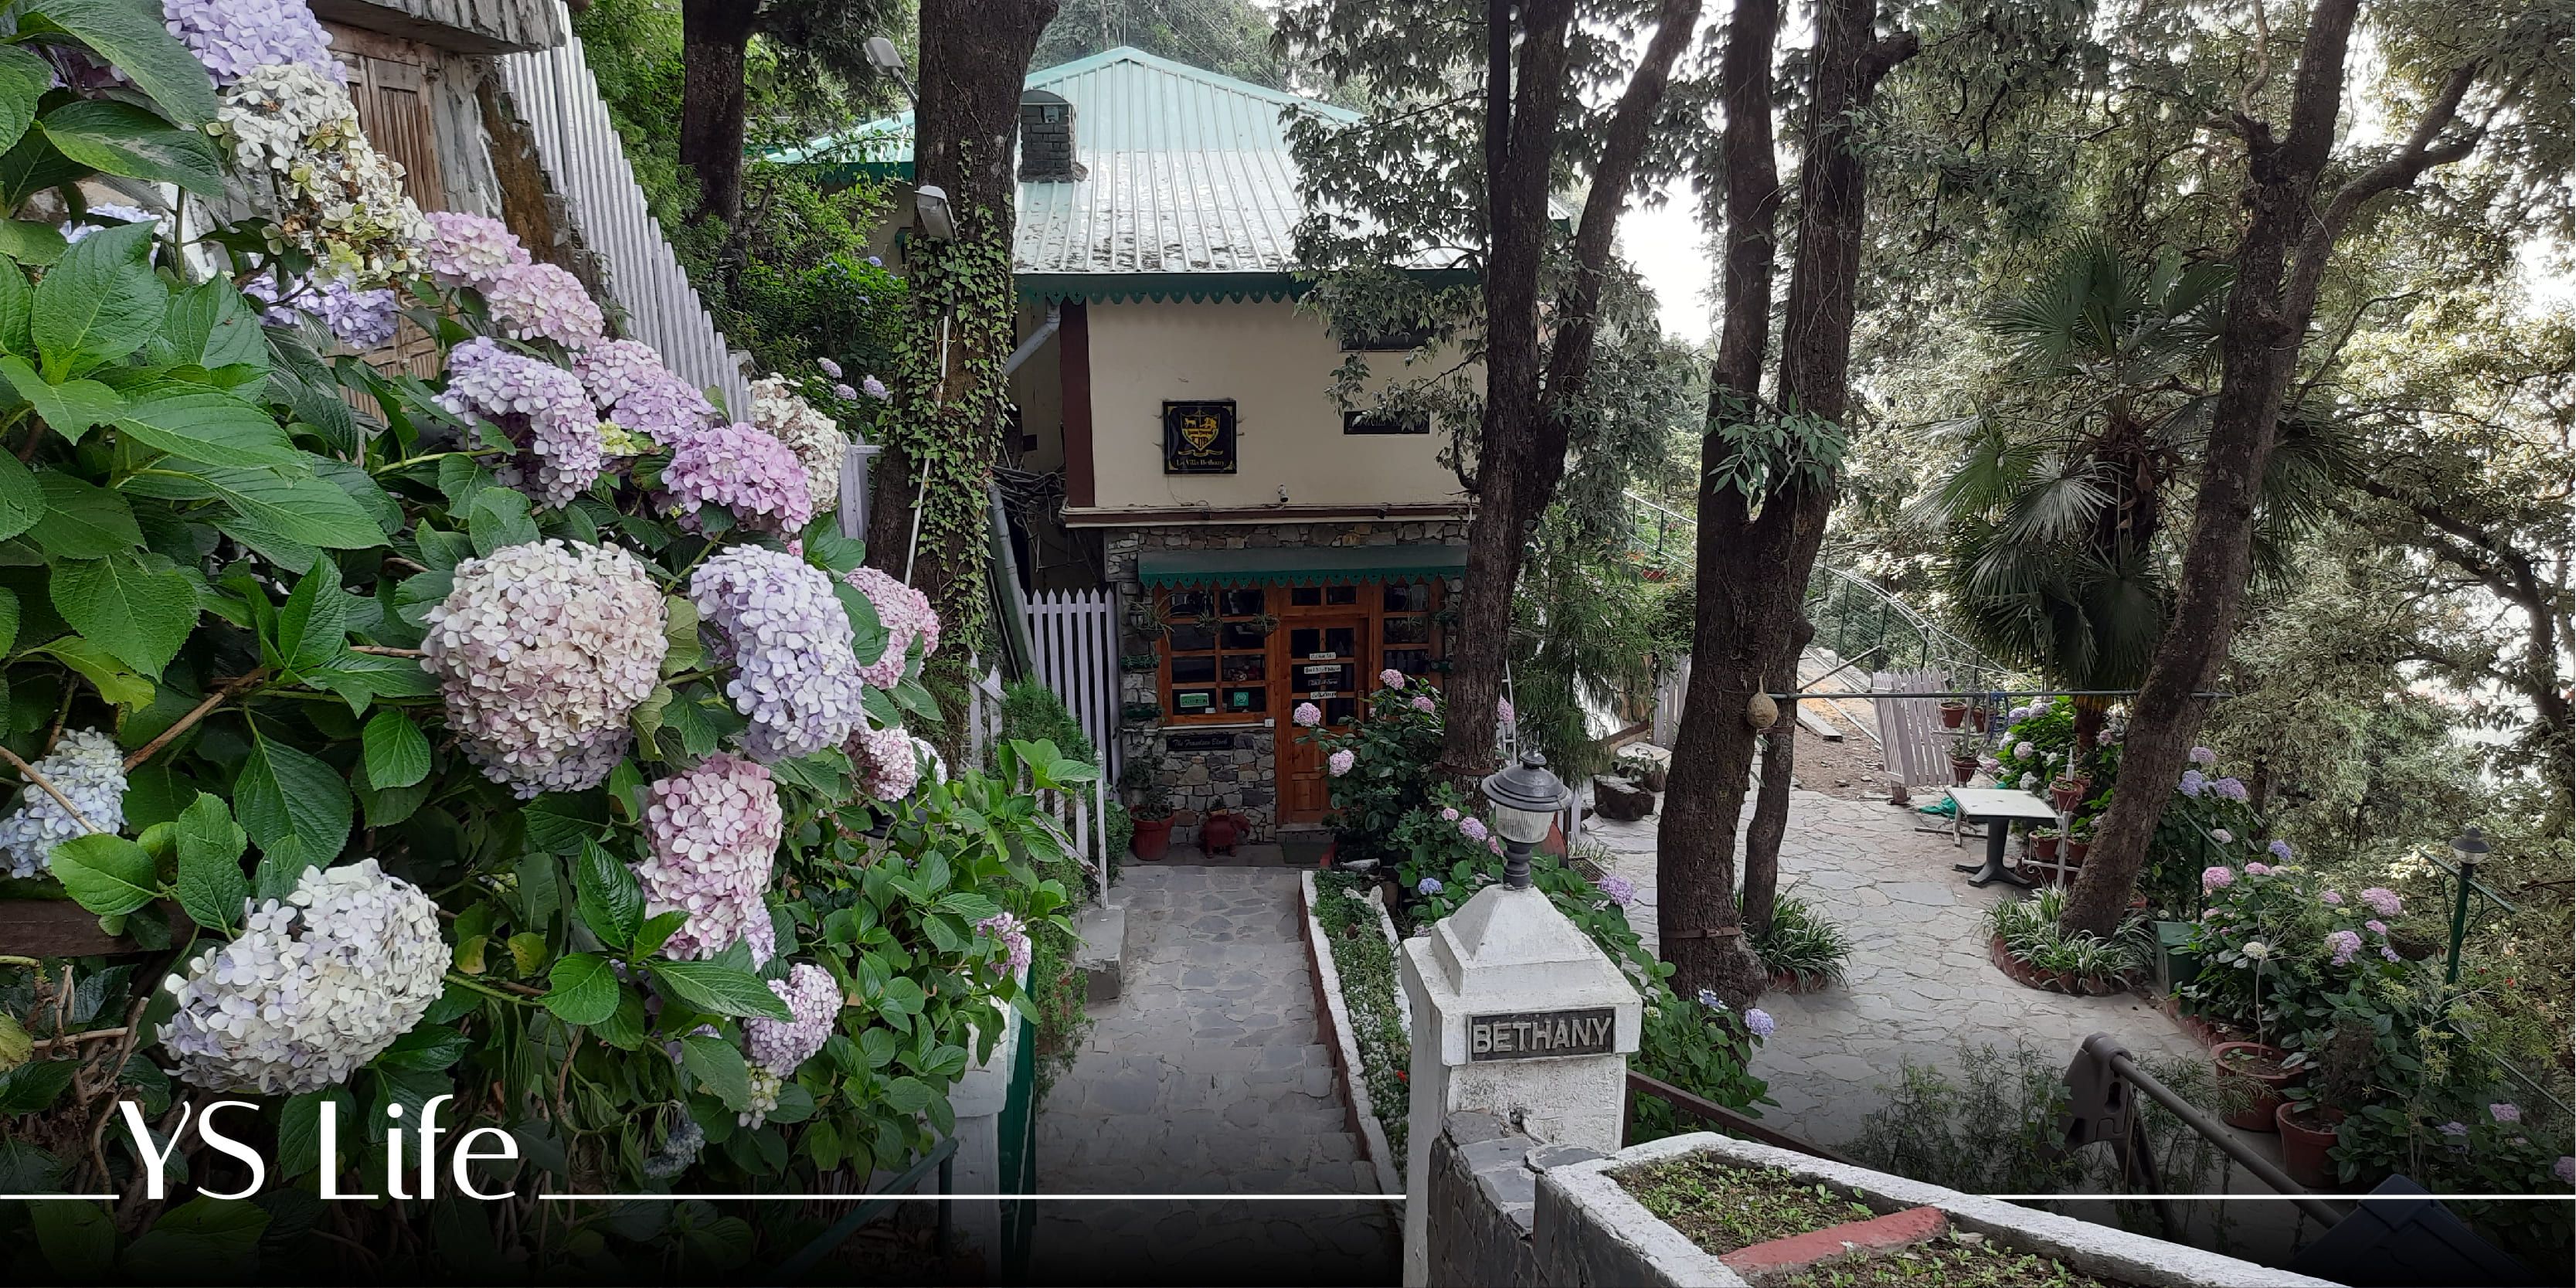 This 100-year-old property in Landour beckons travellers to soak in its heritage